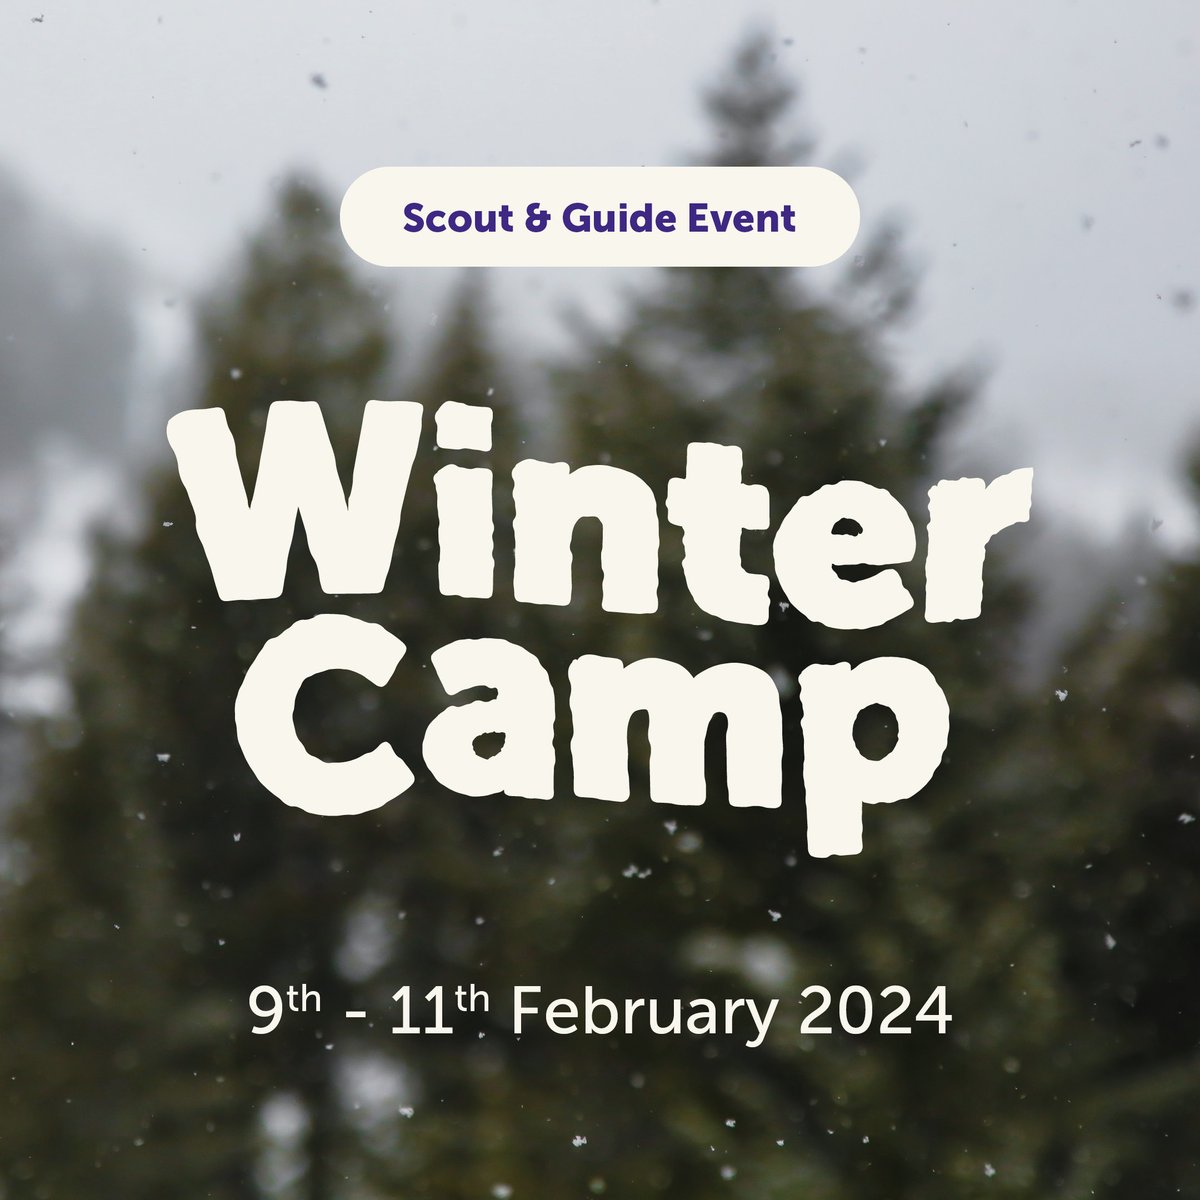 Our Winter Camp is rapidly approaching ❄️ Make sure to book your place as soon as possible as the countdown is on. Scout and Guide leaders are welcome to stay free of charge, and we have a two-tiered package for the younger ones coming along. brnw.ch/21wGtxT